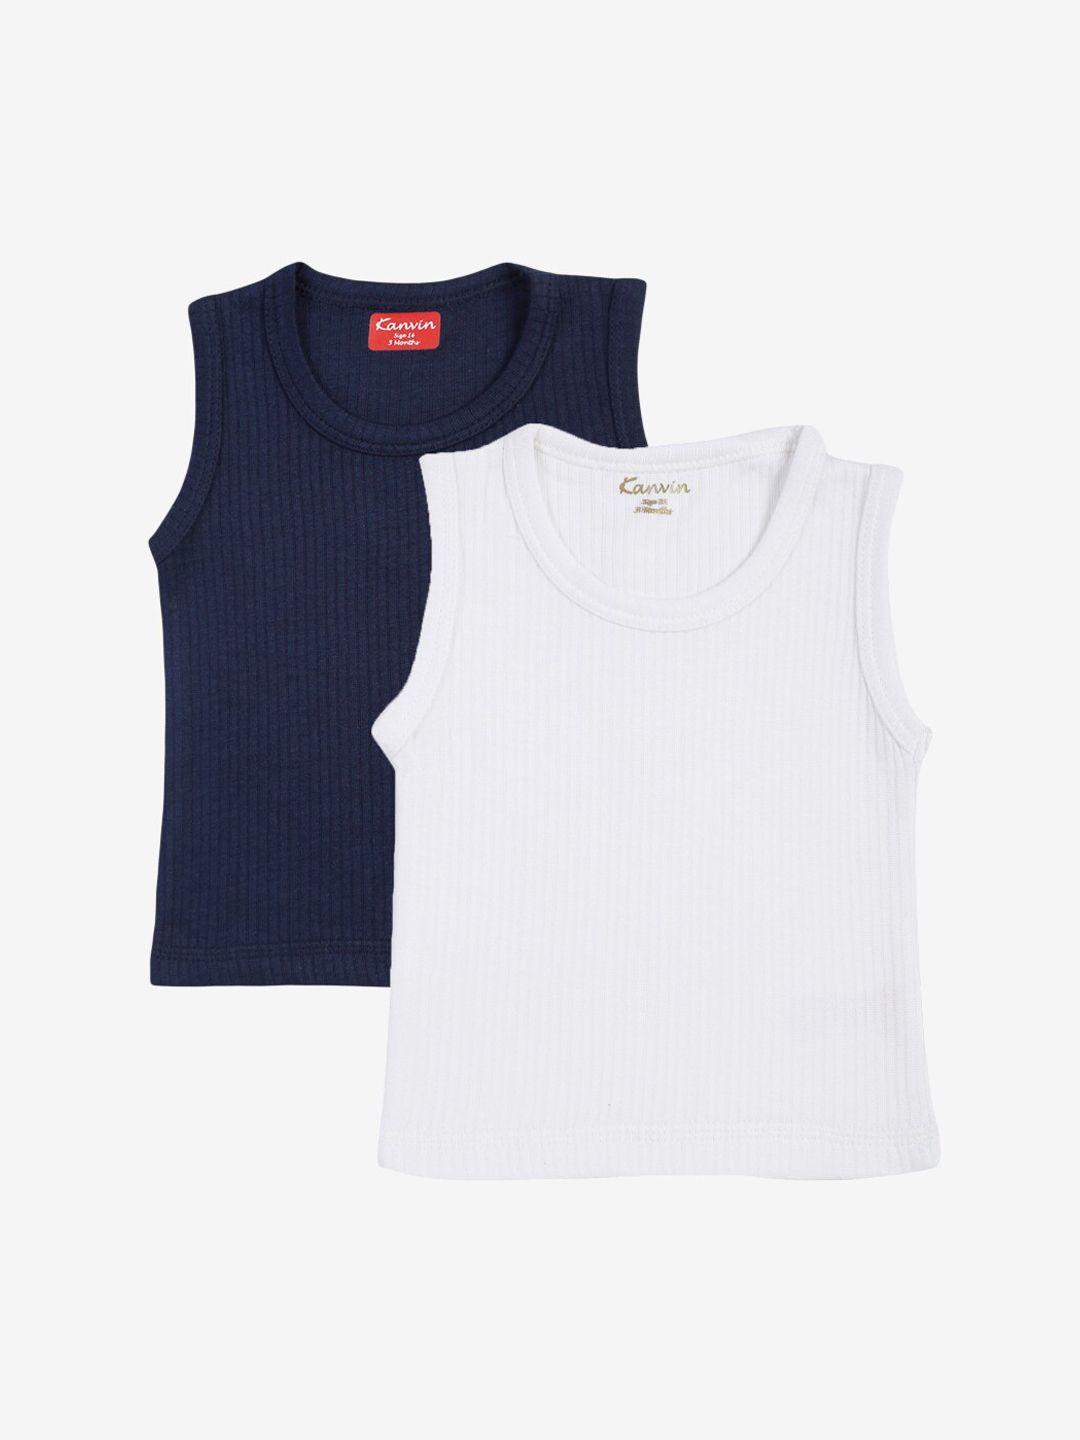 kanvin boys navy blue and white pack of 2 solid thermal tops